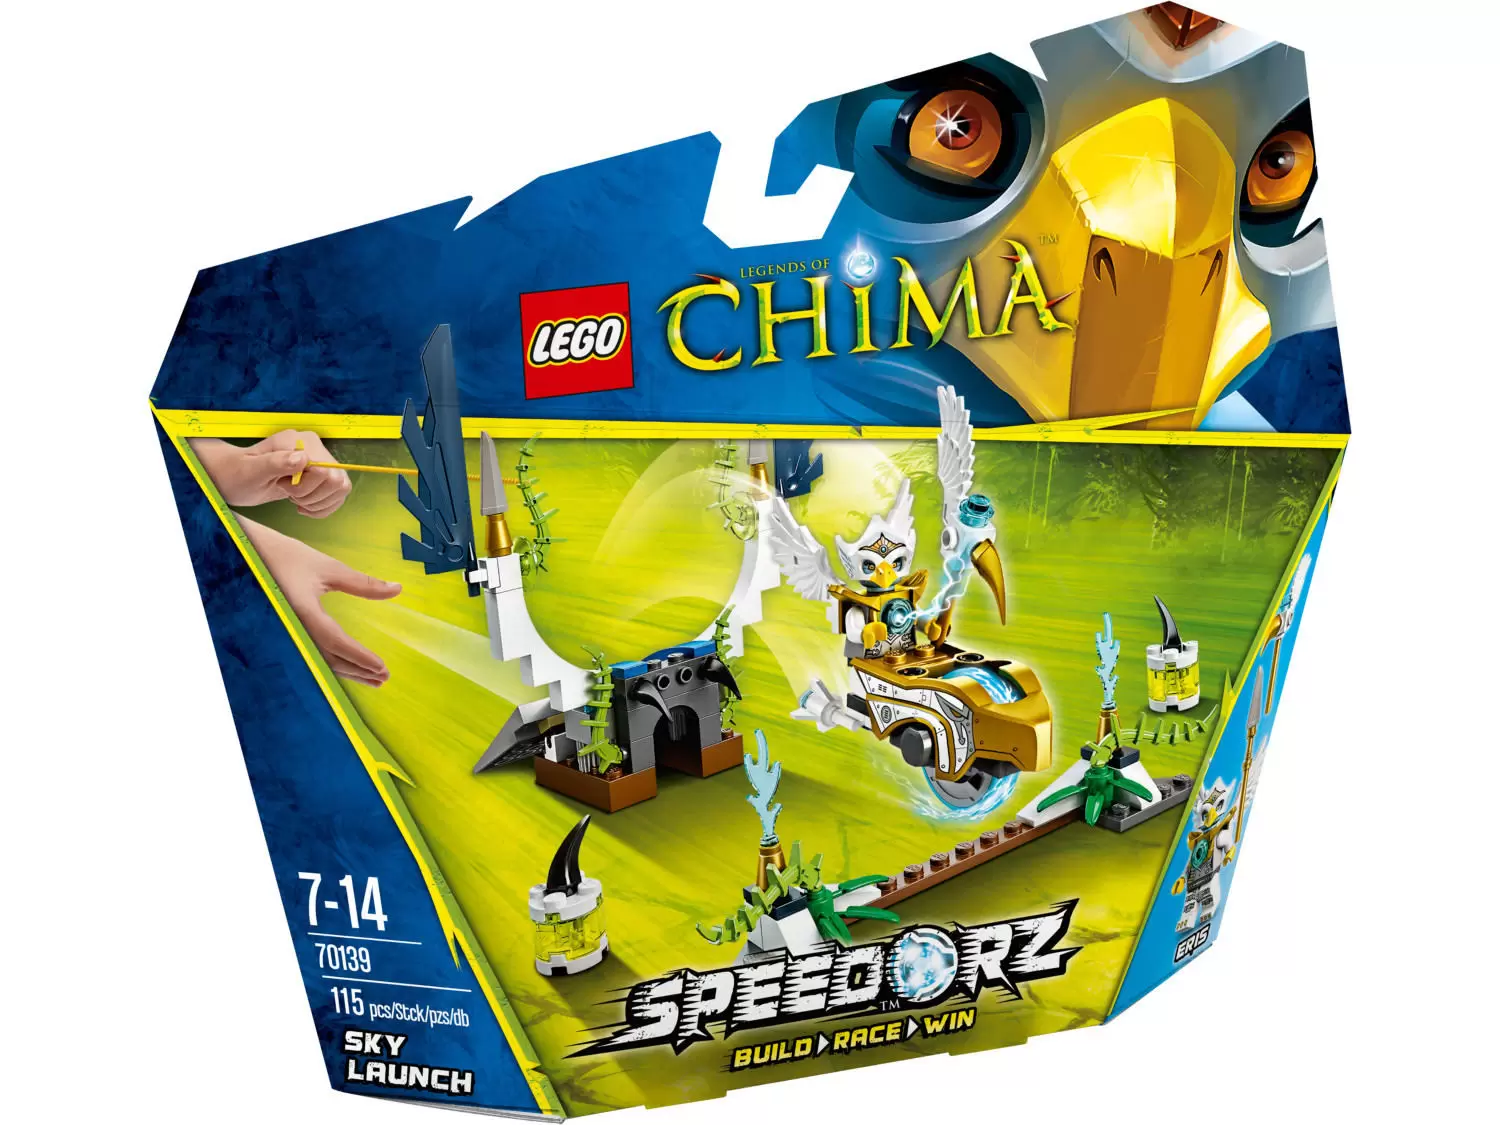 LEGO Legends of Chima - Sky Launch